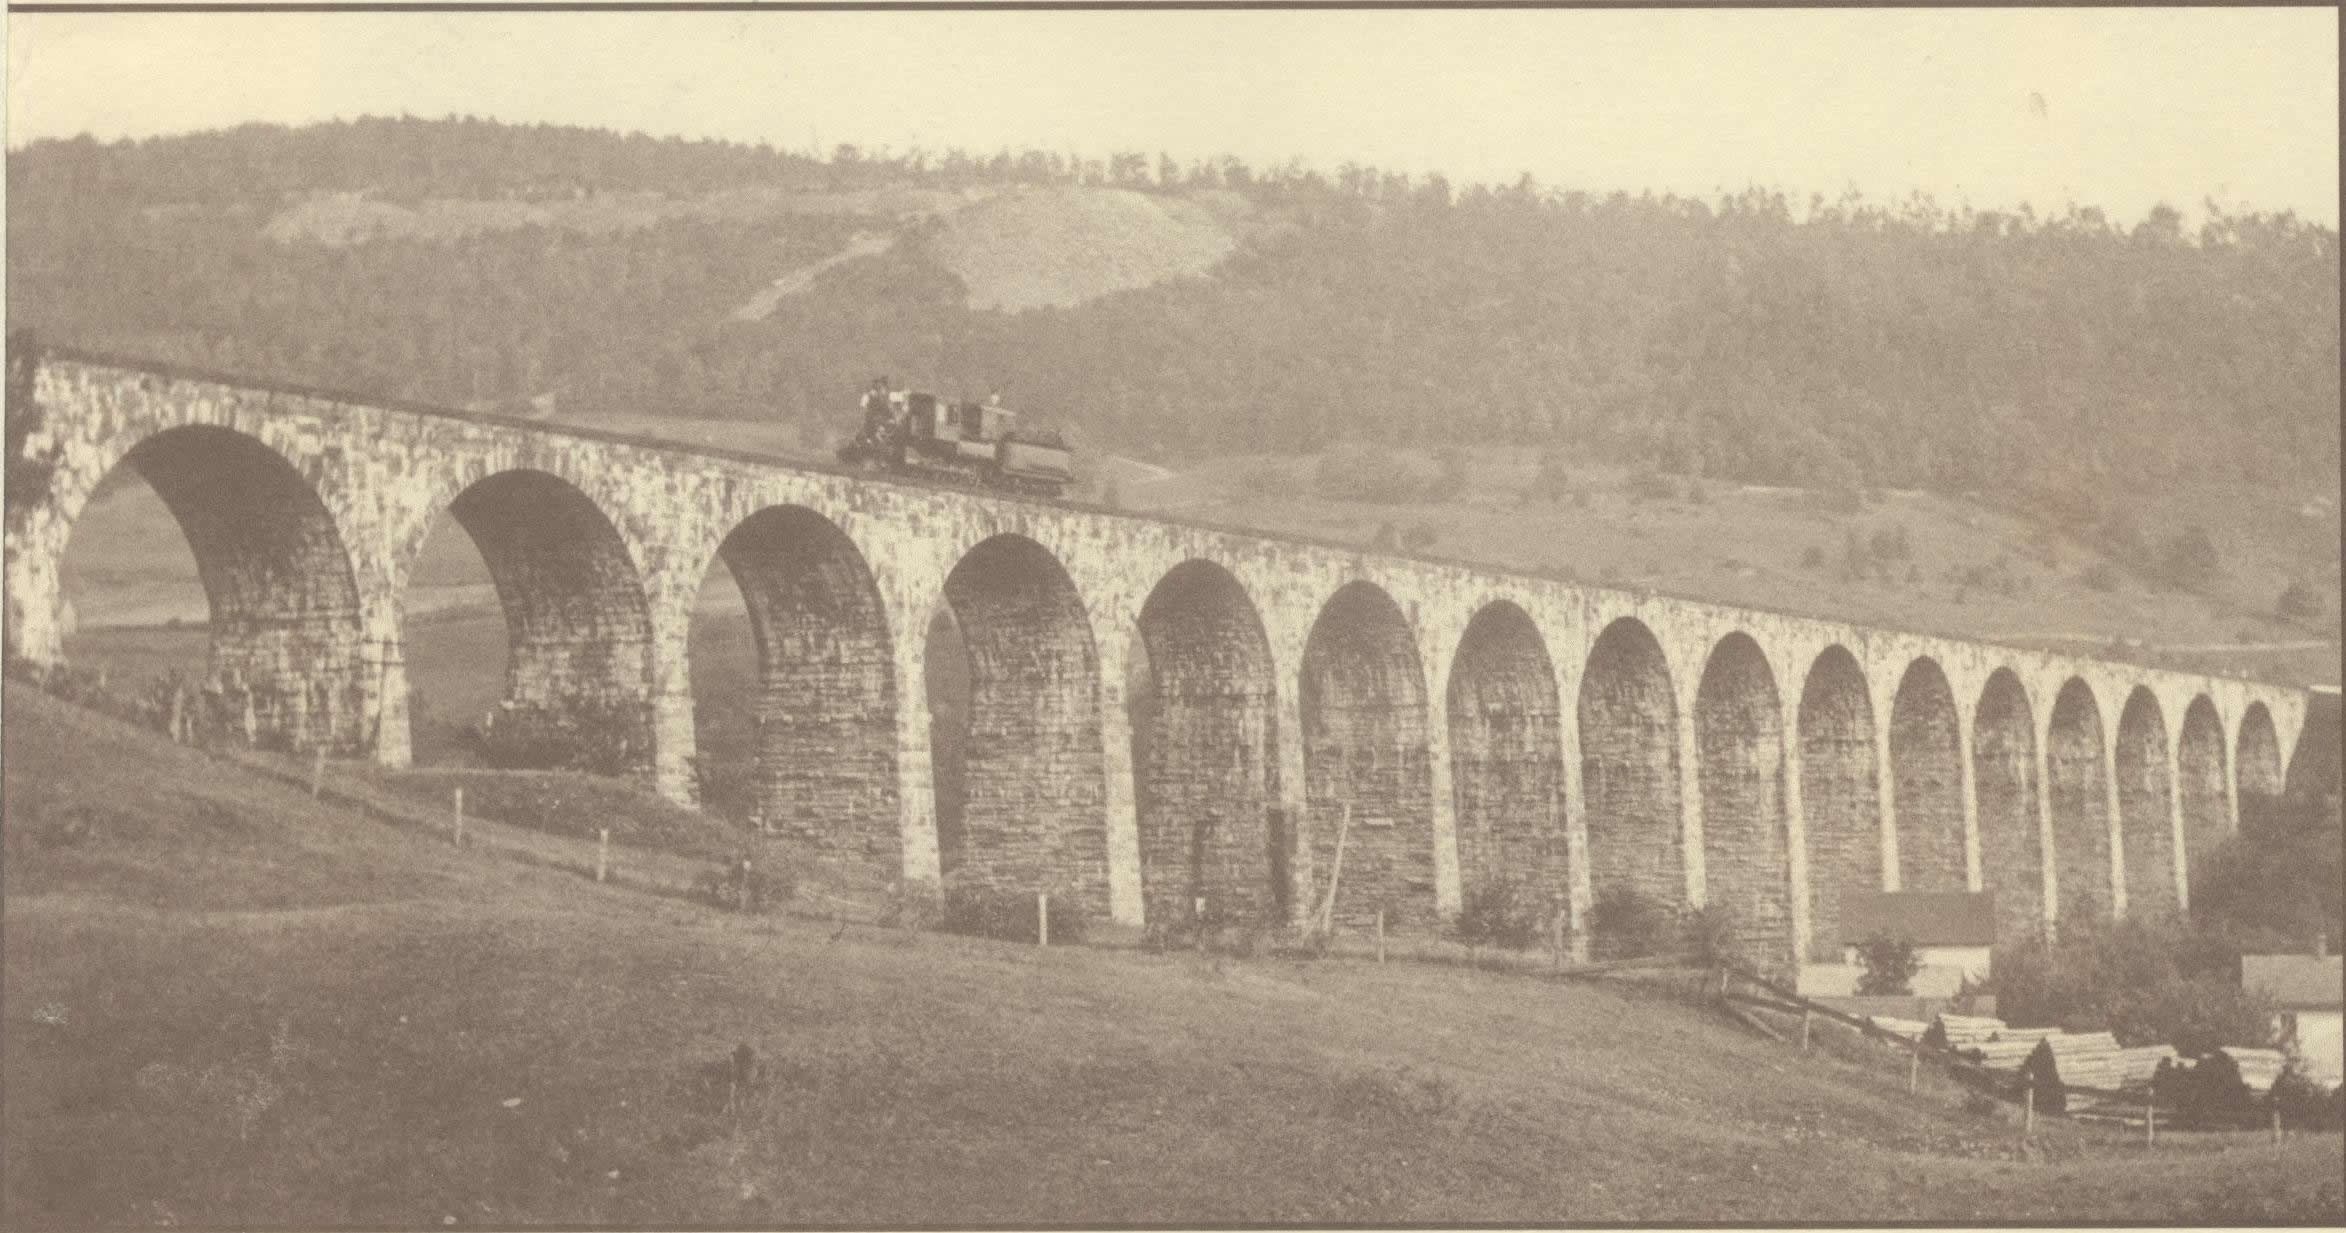 1905 Picture of the Starrucca Viaduct and train